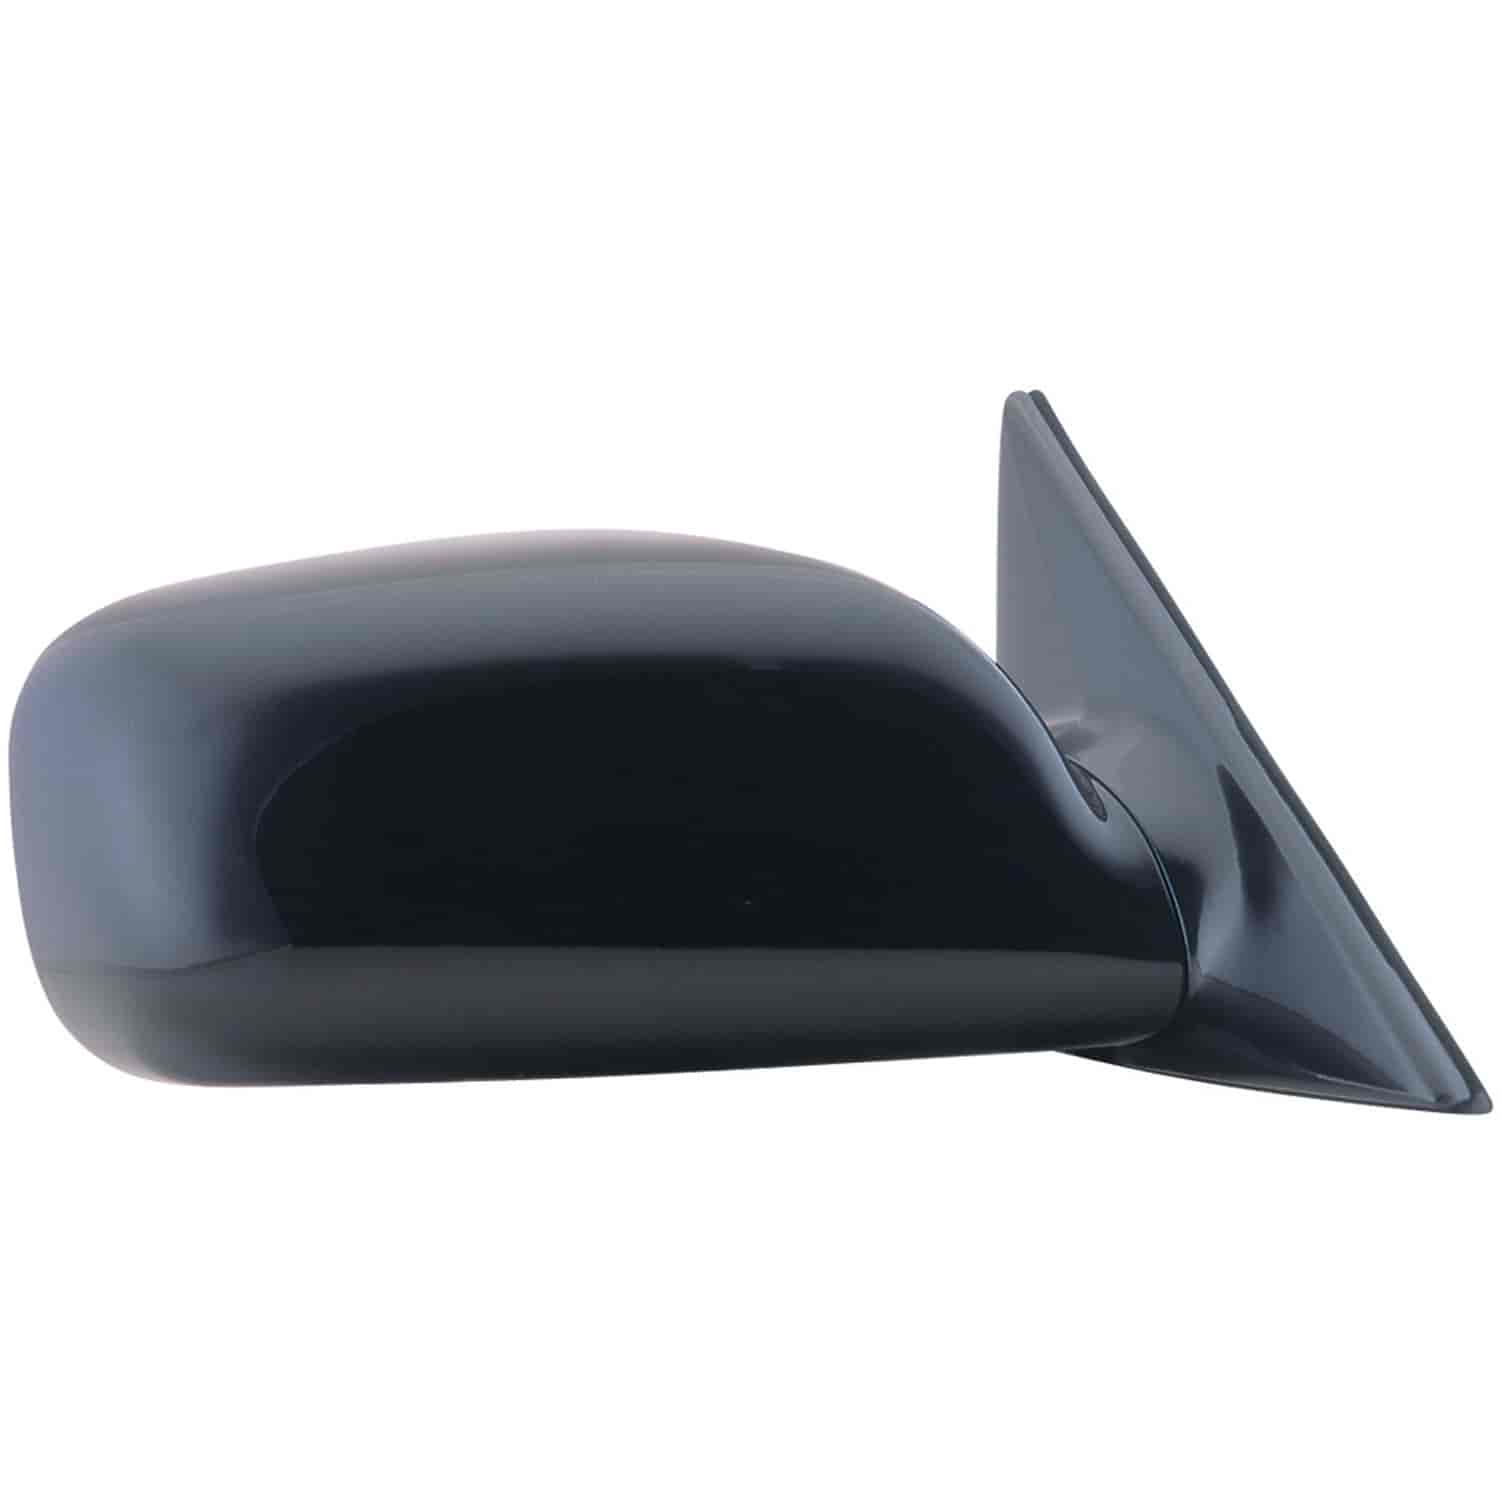 OEM Style Replacement mirror for 02-06 Toyota Camry US built passenger side mirror tested to fit and